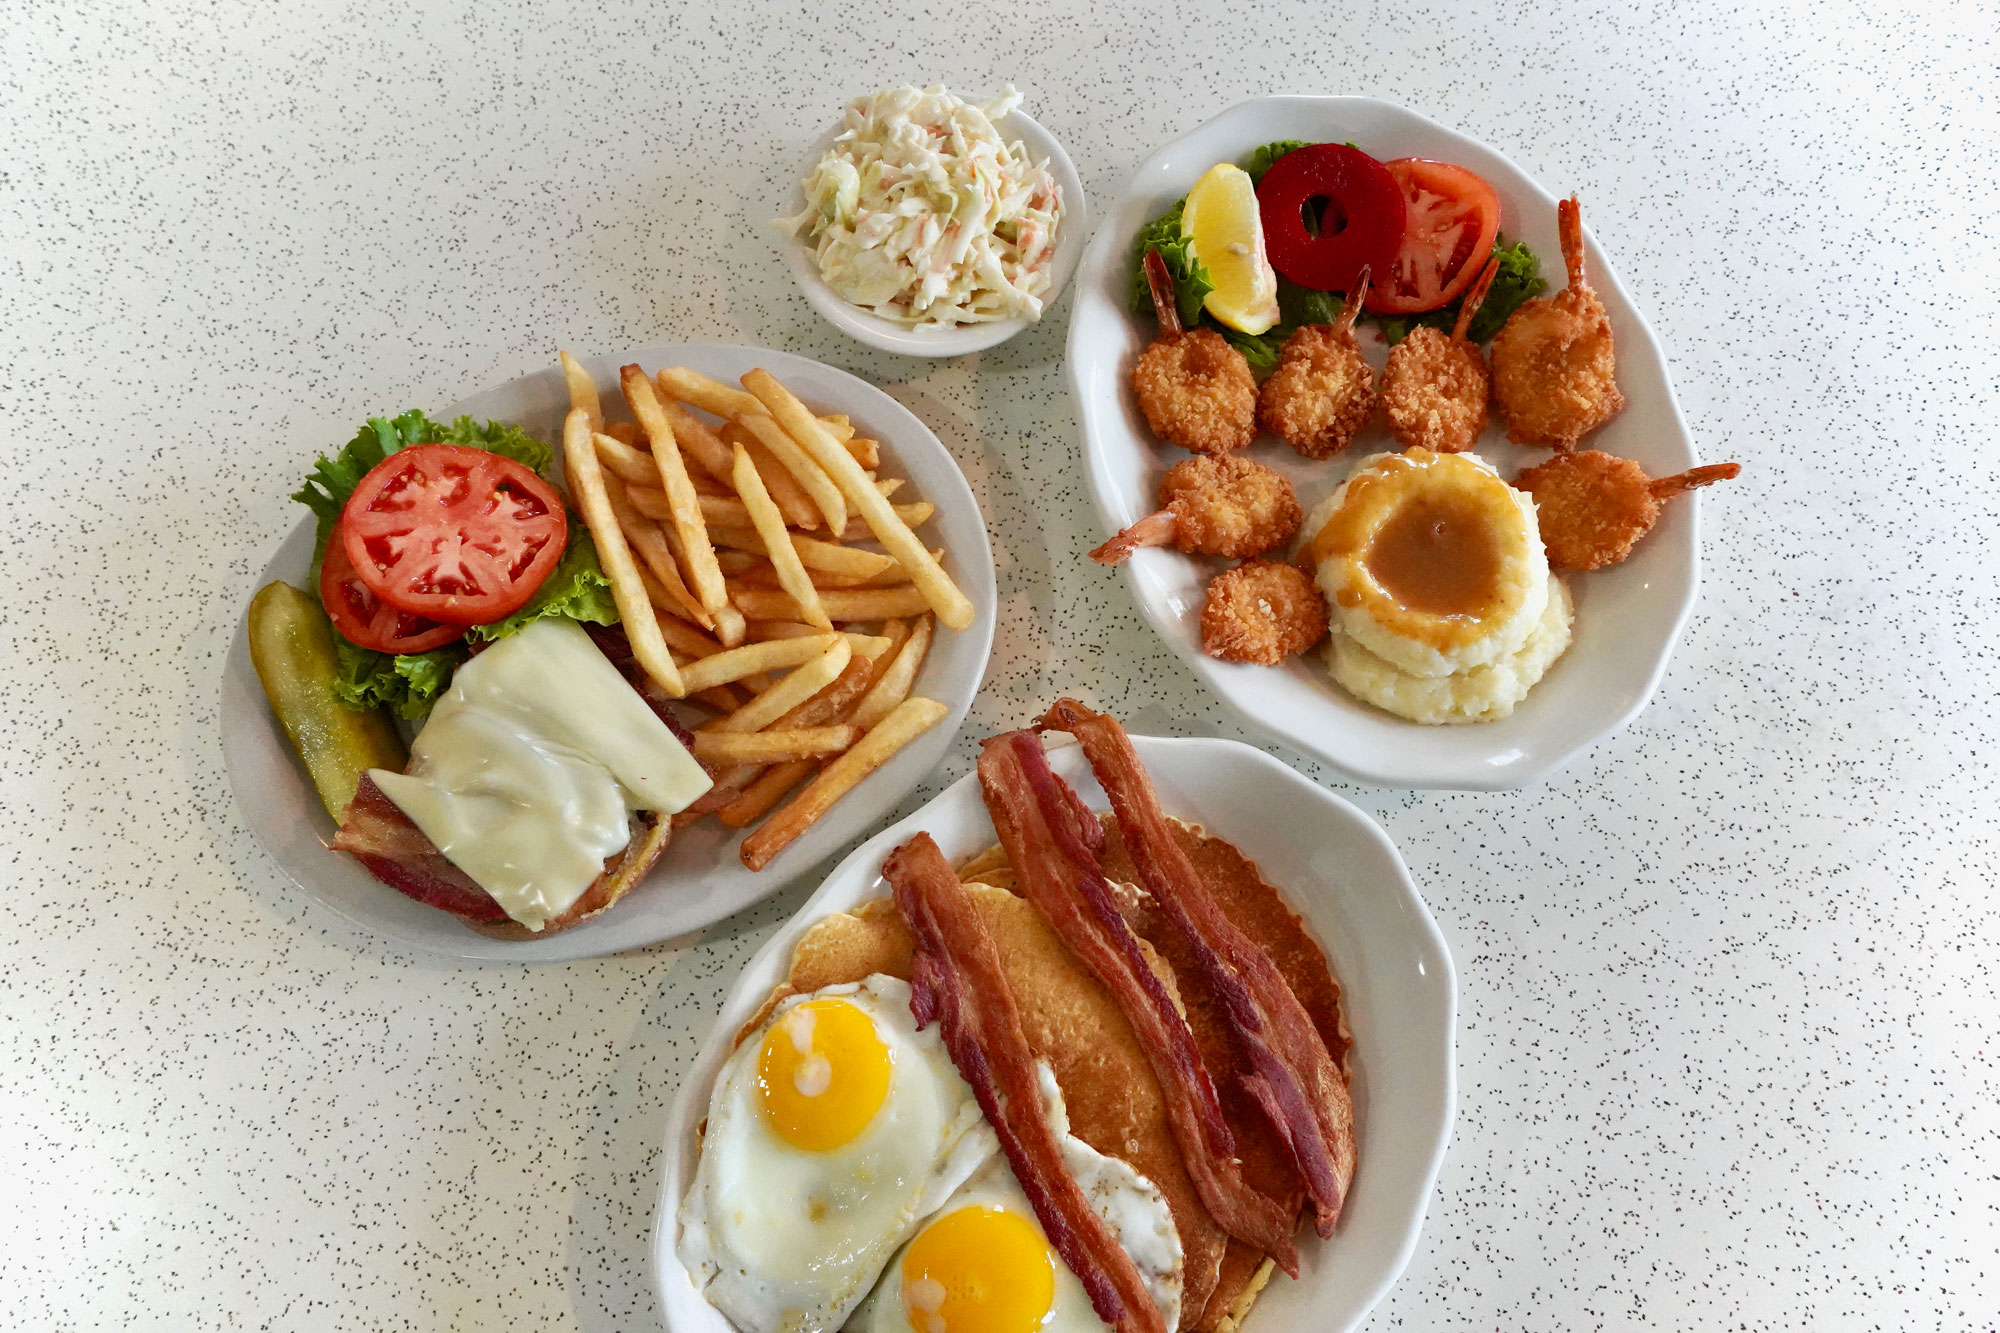 Cheese burger, fries, bacon and eggs, fried shrimp